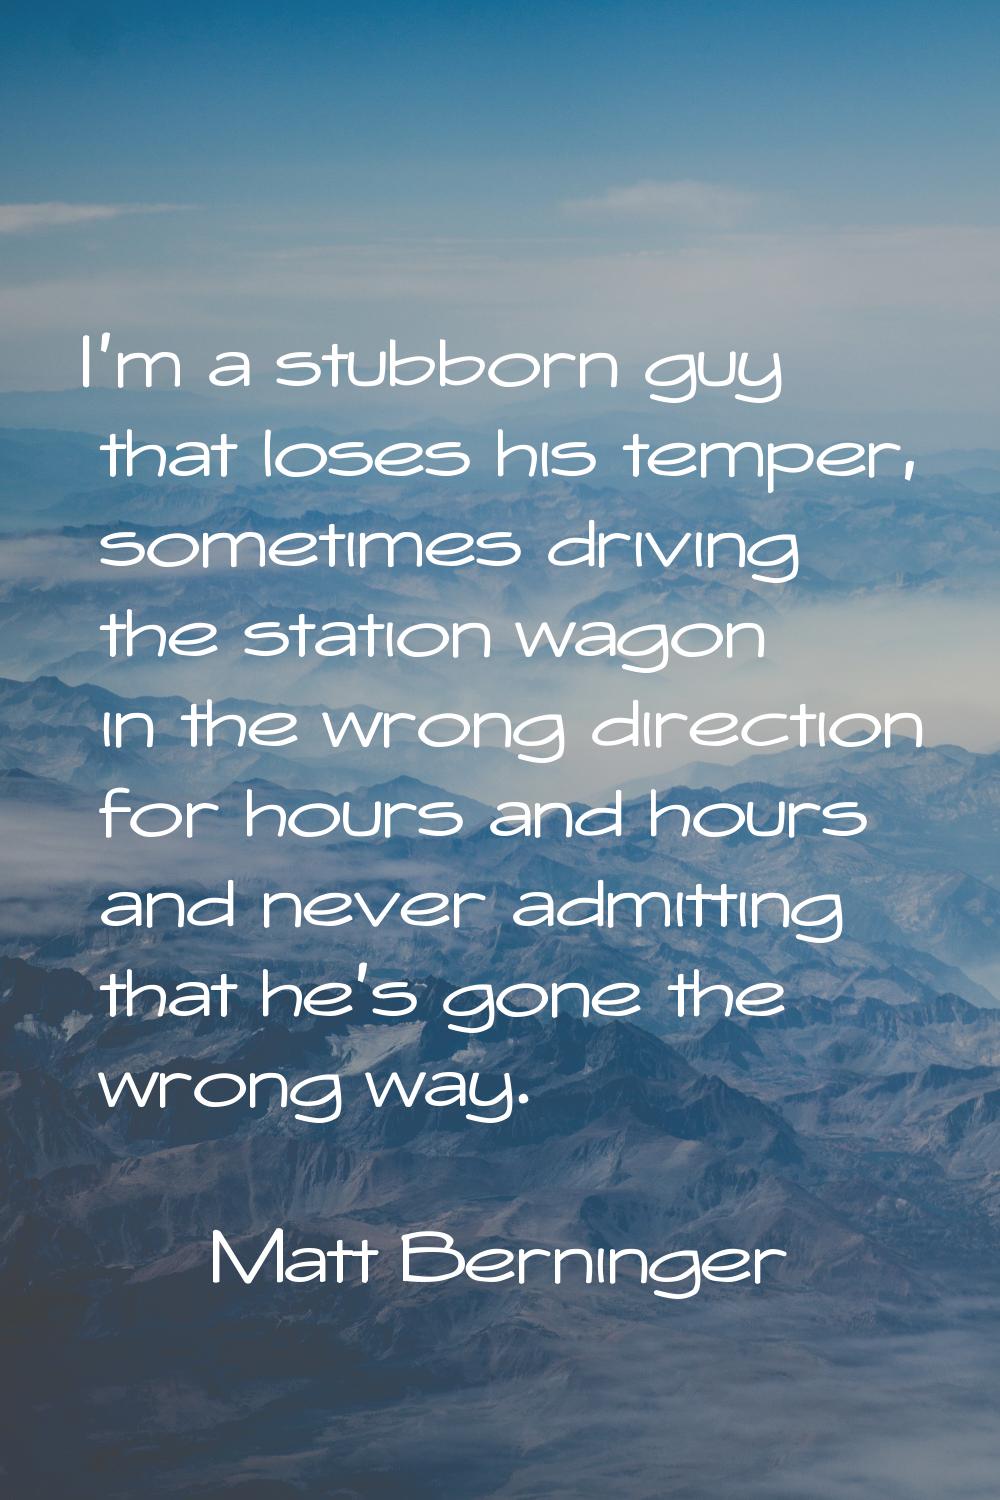 I'm a stubborn guy that loses his temper, sometimes driving the station wagon in the wrong directio